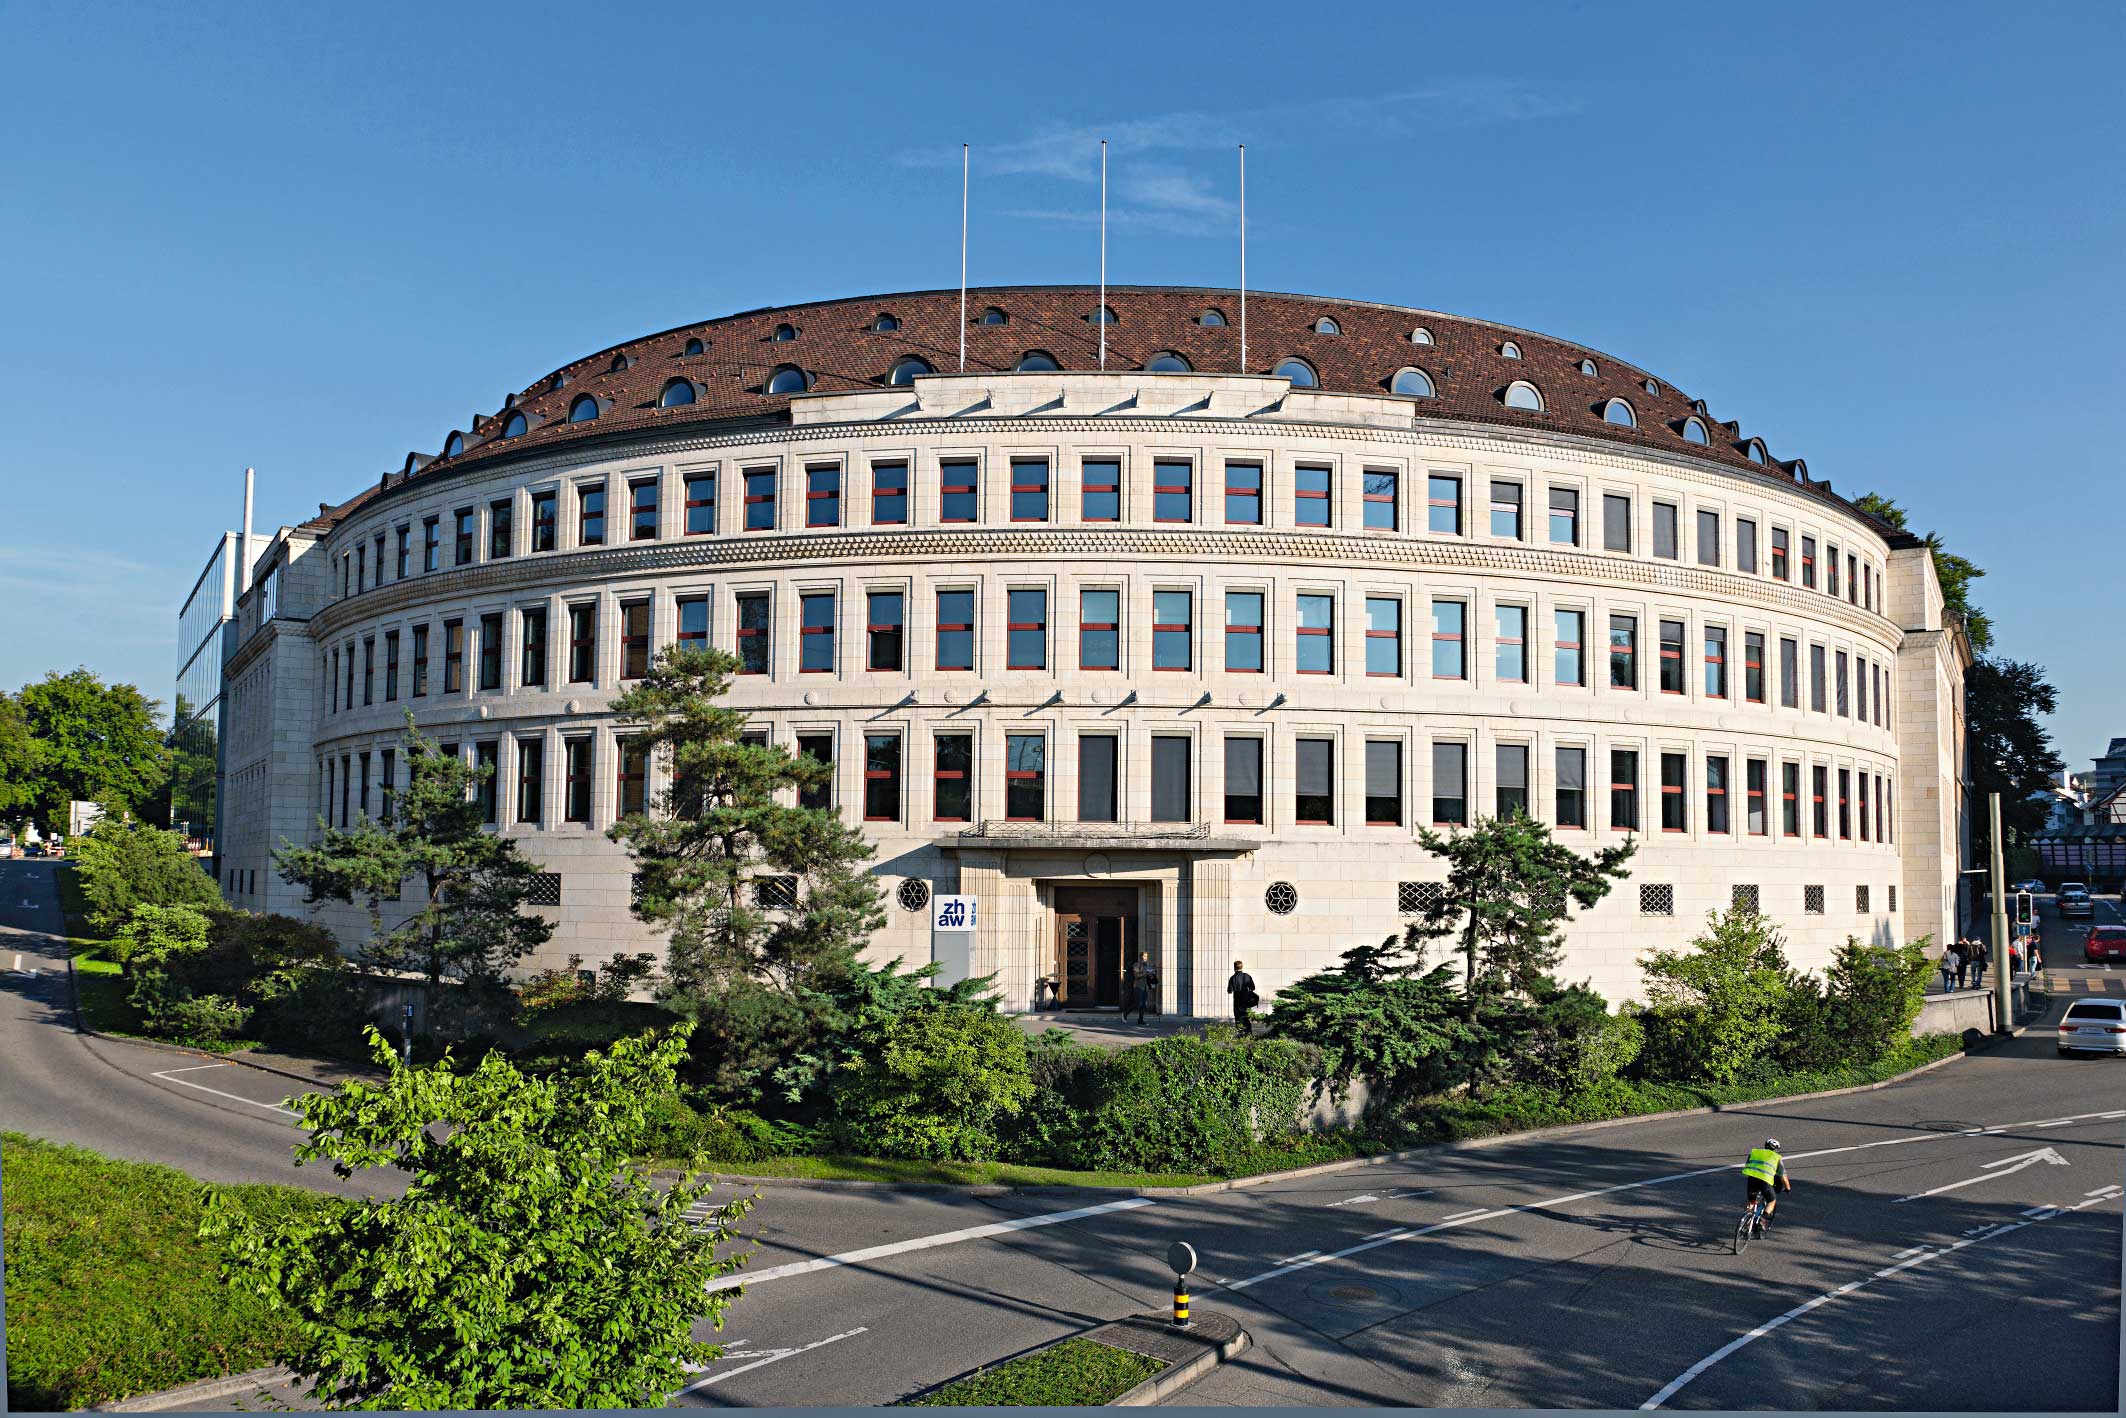 School of Management and Law, Zurich University of Applied Sciences (ZHAW)